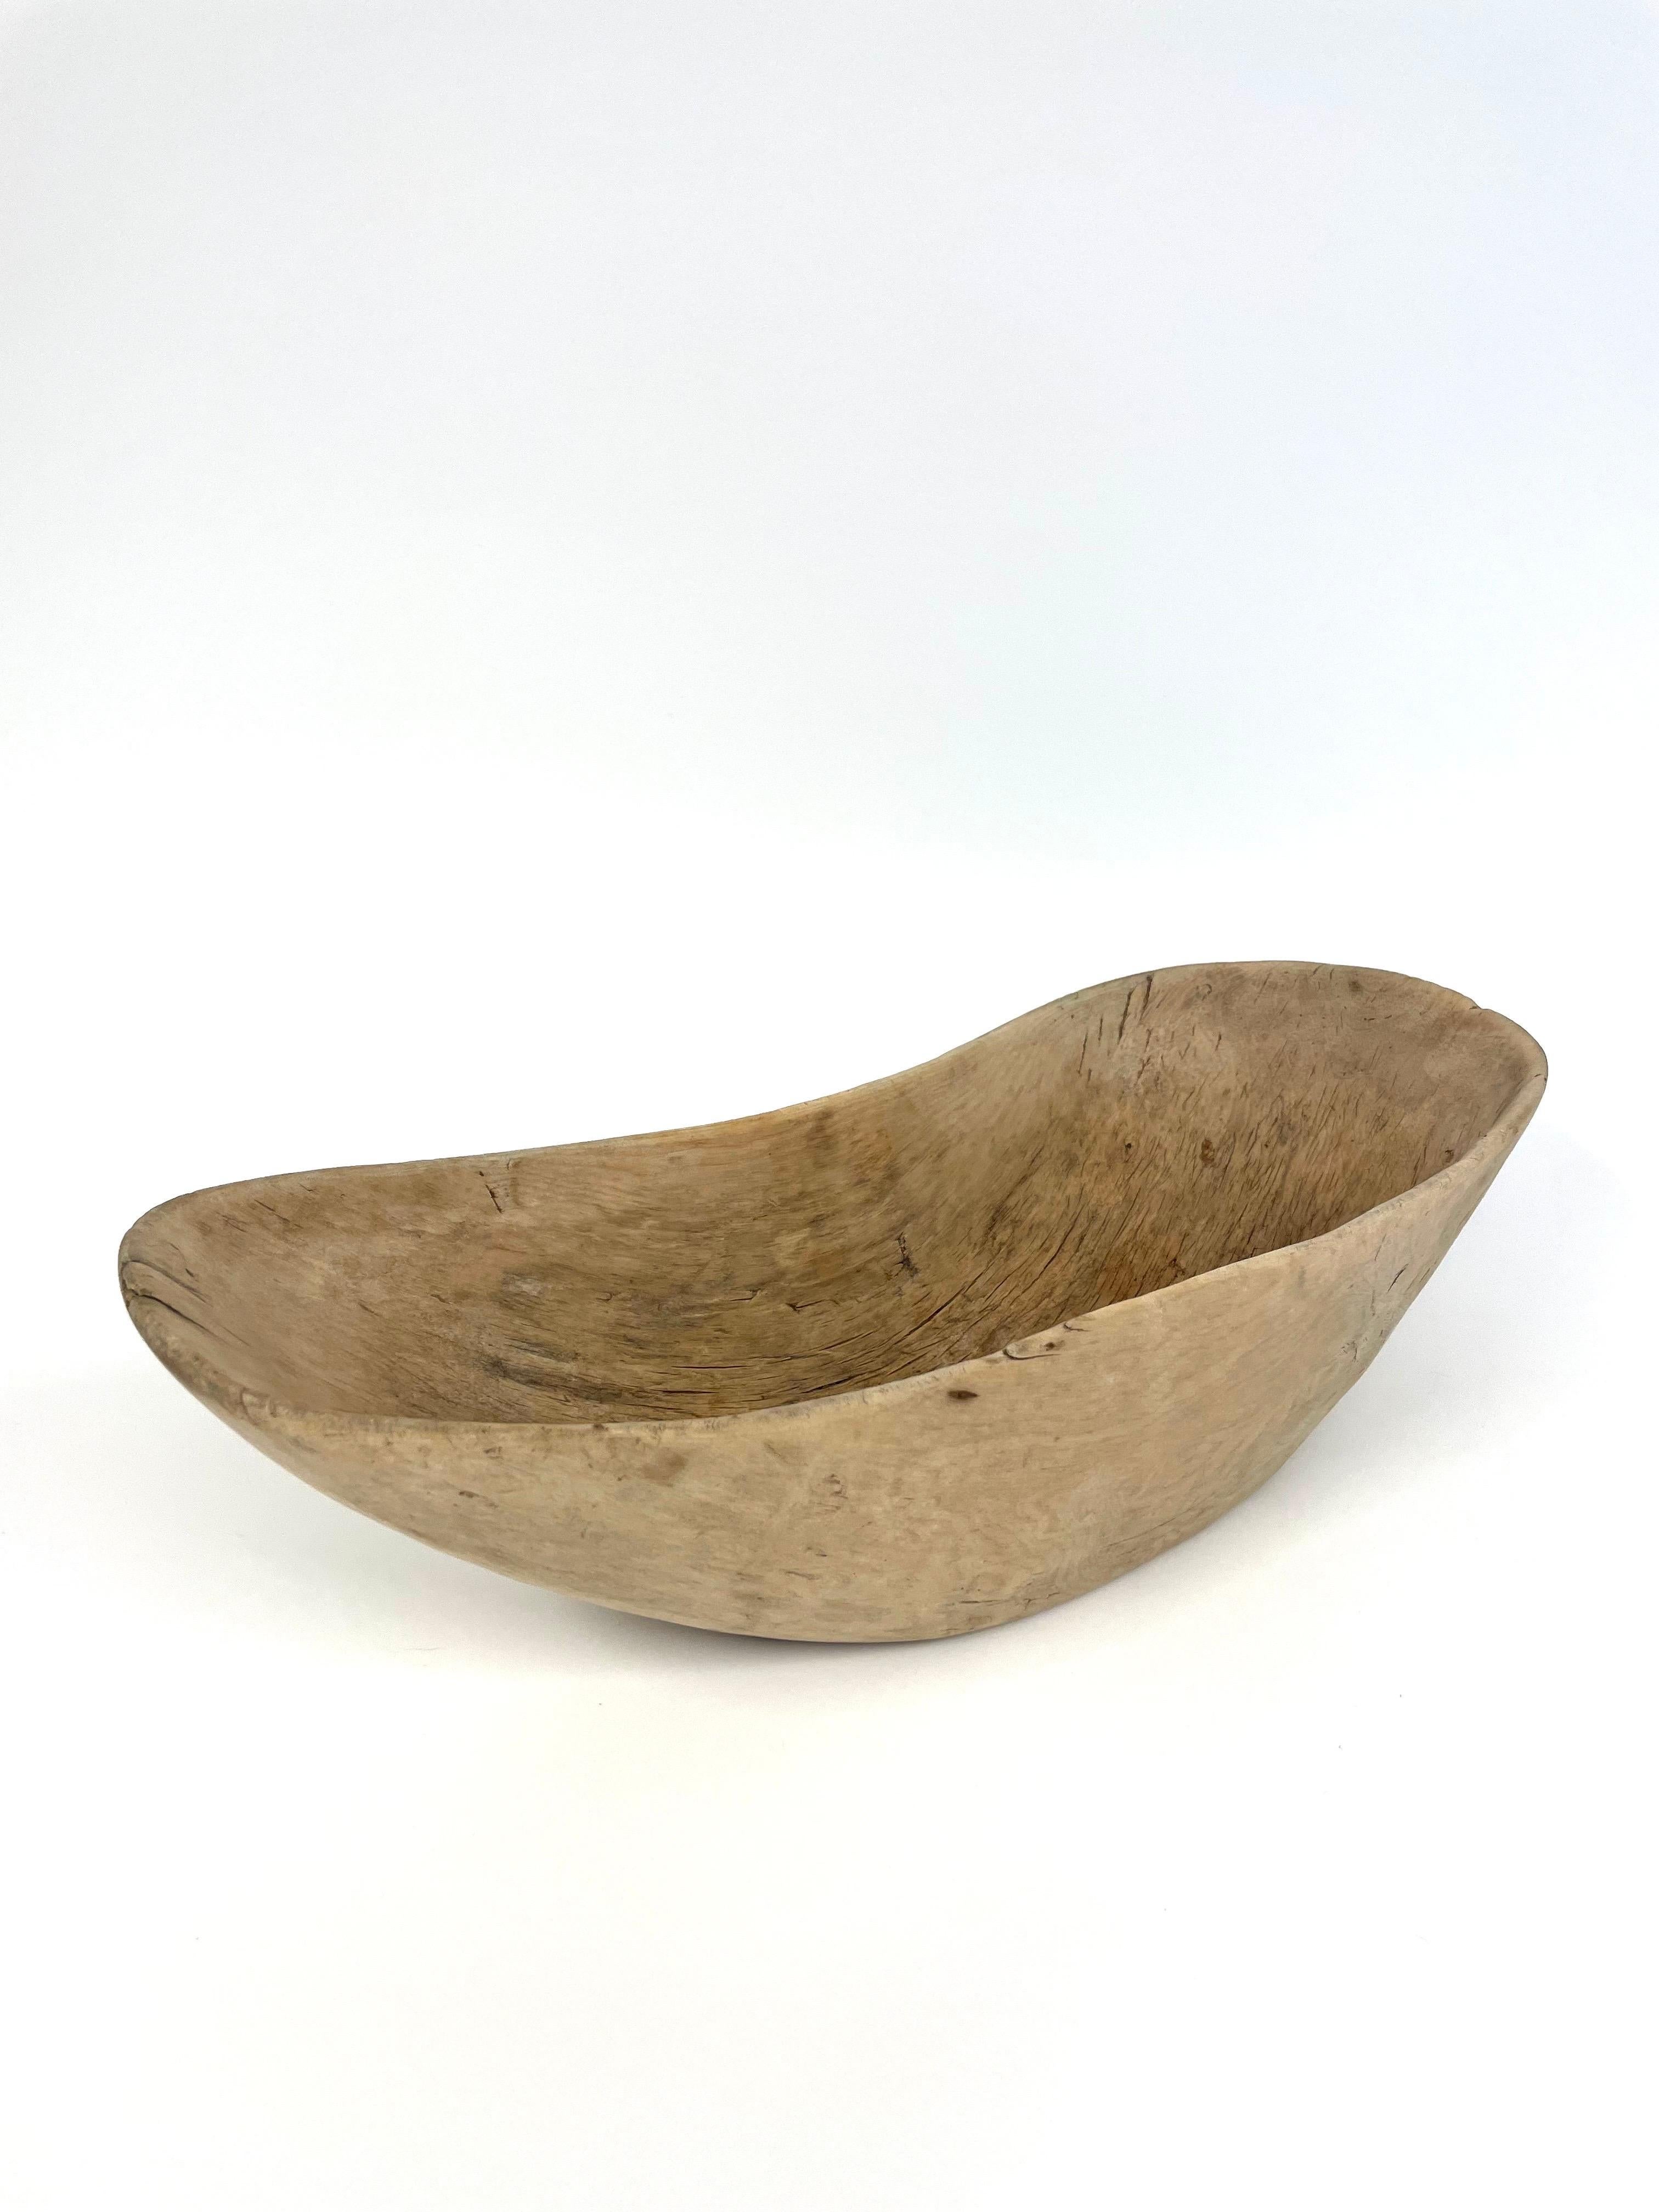 This is a beautiful Swedish hand-carfted, carved 19th century wooden bowl in Wabi Sabi style. 
It comes made in an oblong piece of pine, perhaps a thin trunk but more likely a thick branch given the slightly curved shape. Either way, the curved